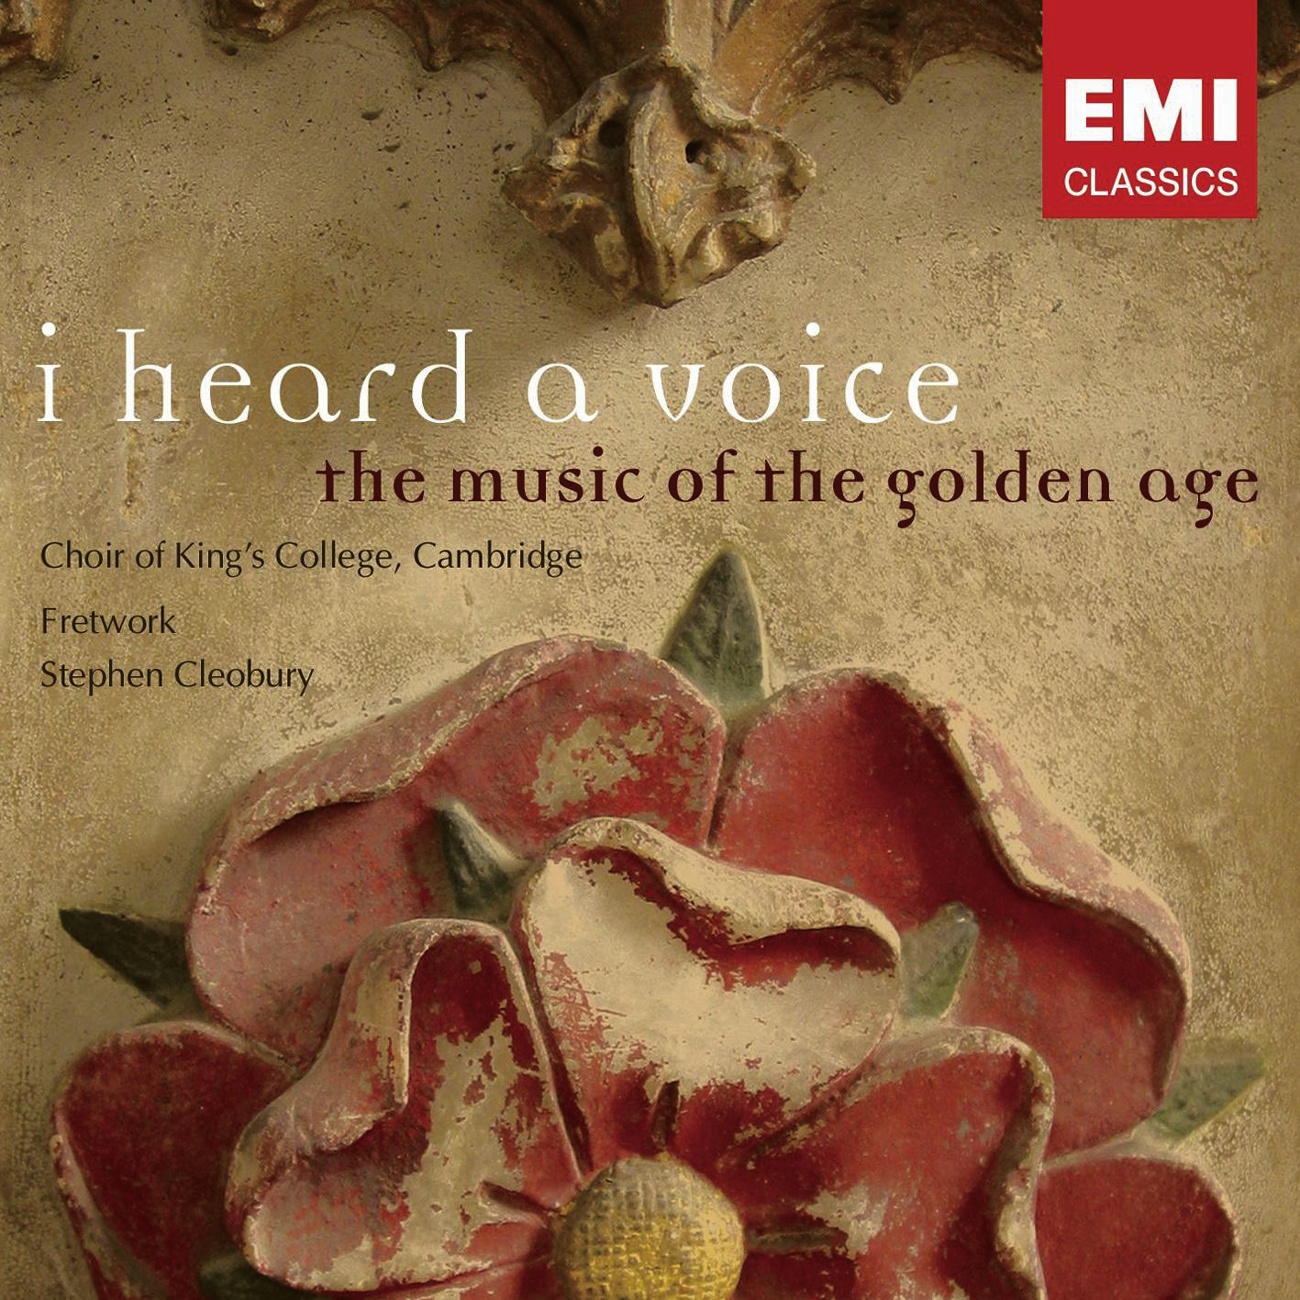 I heard a voice - the music of the golden age